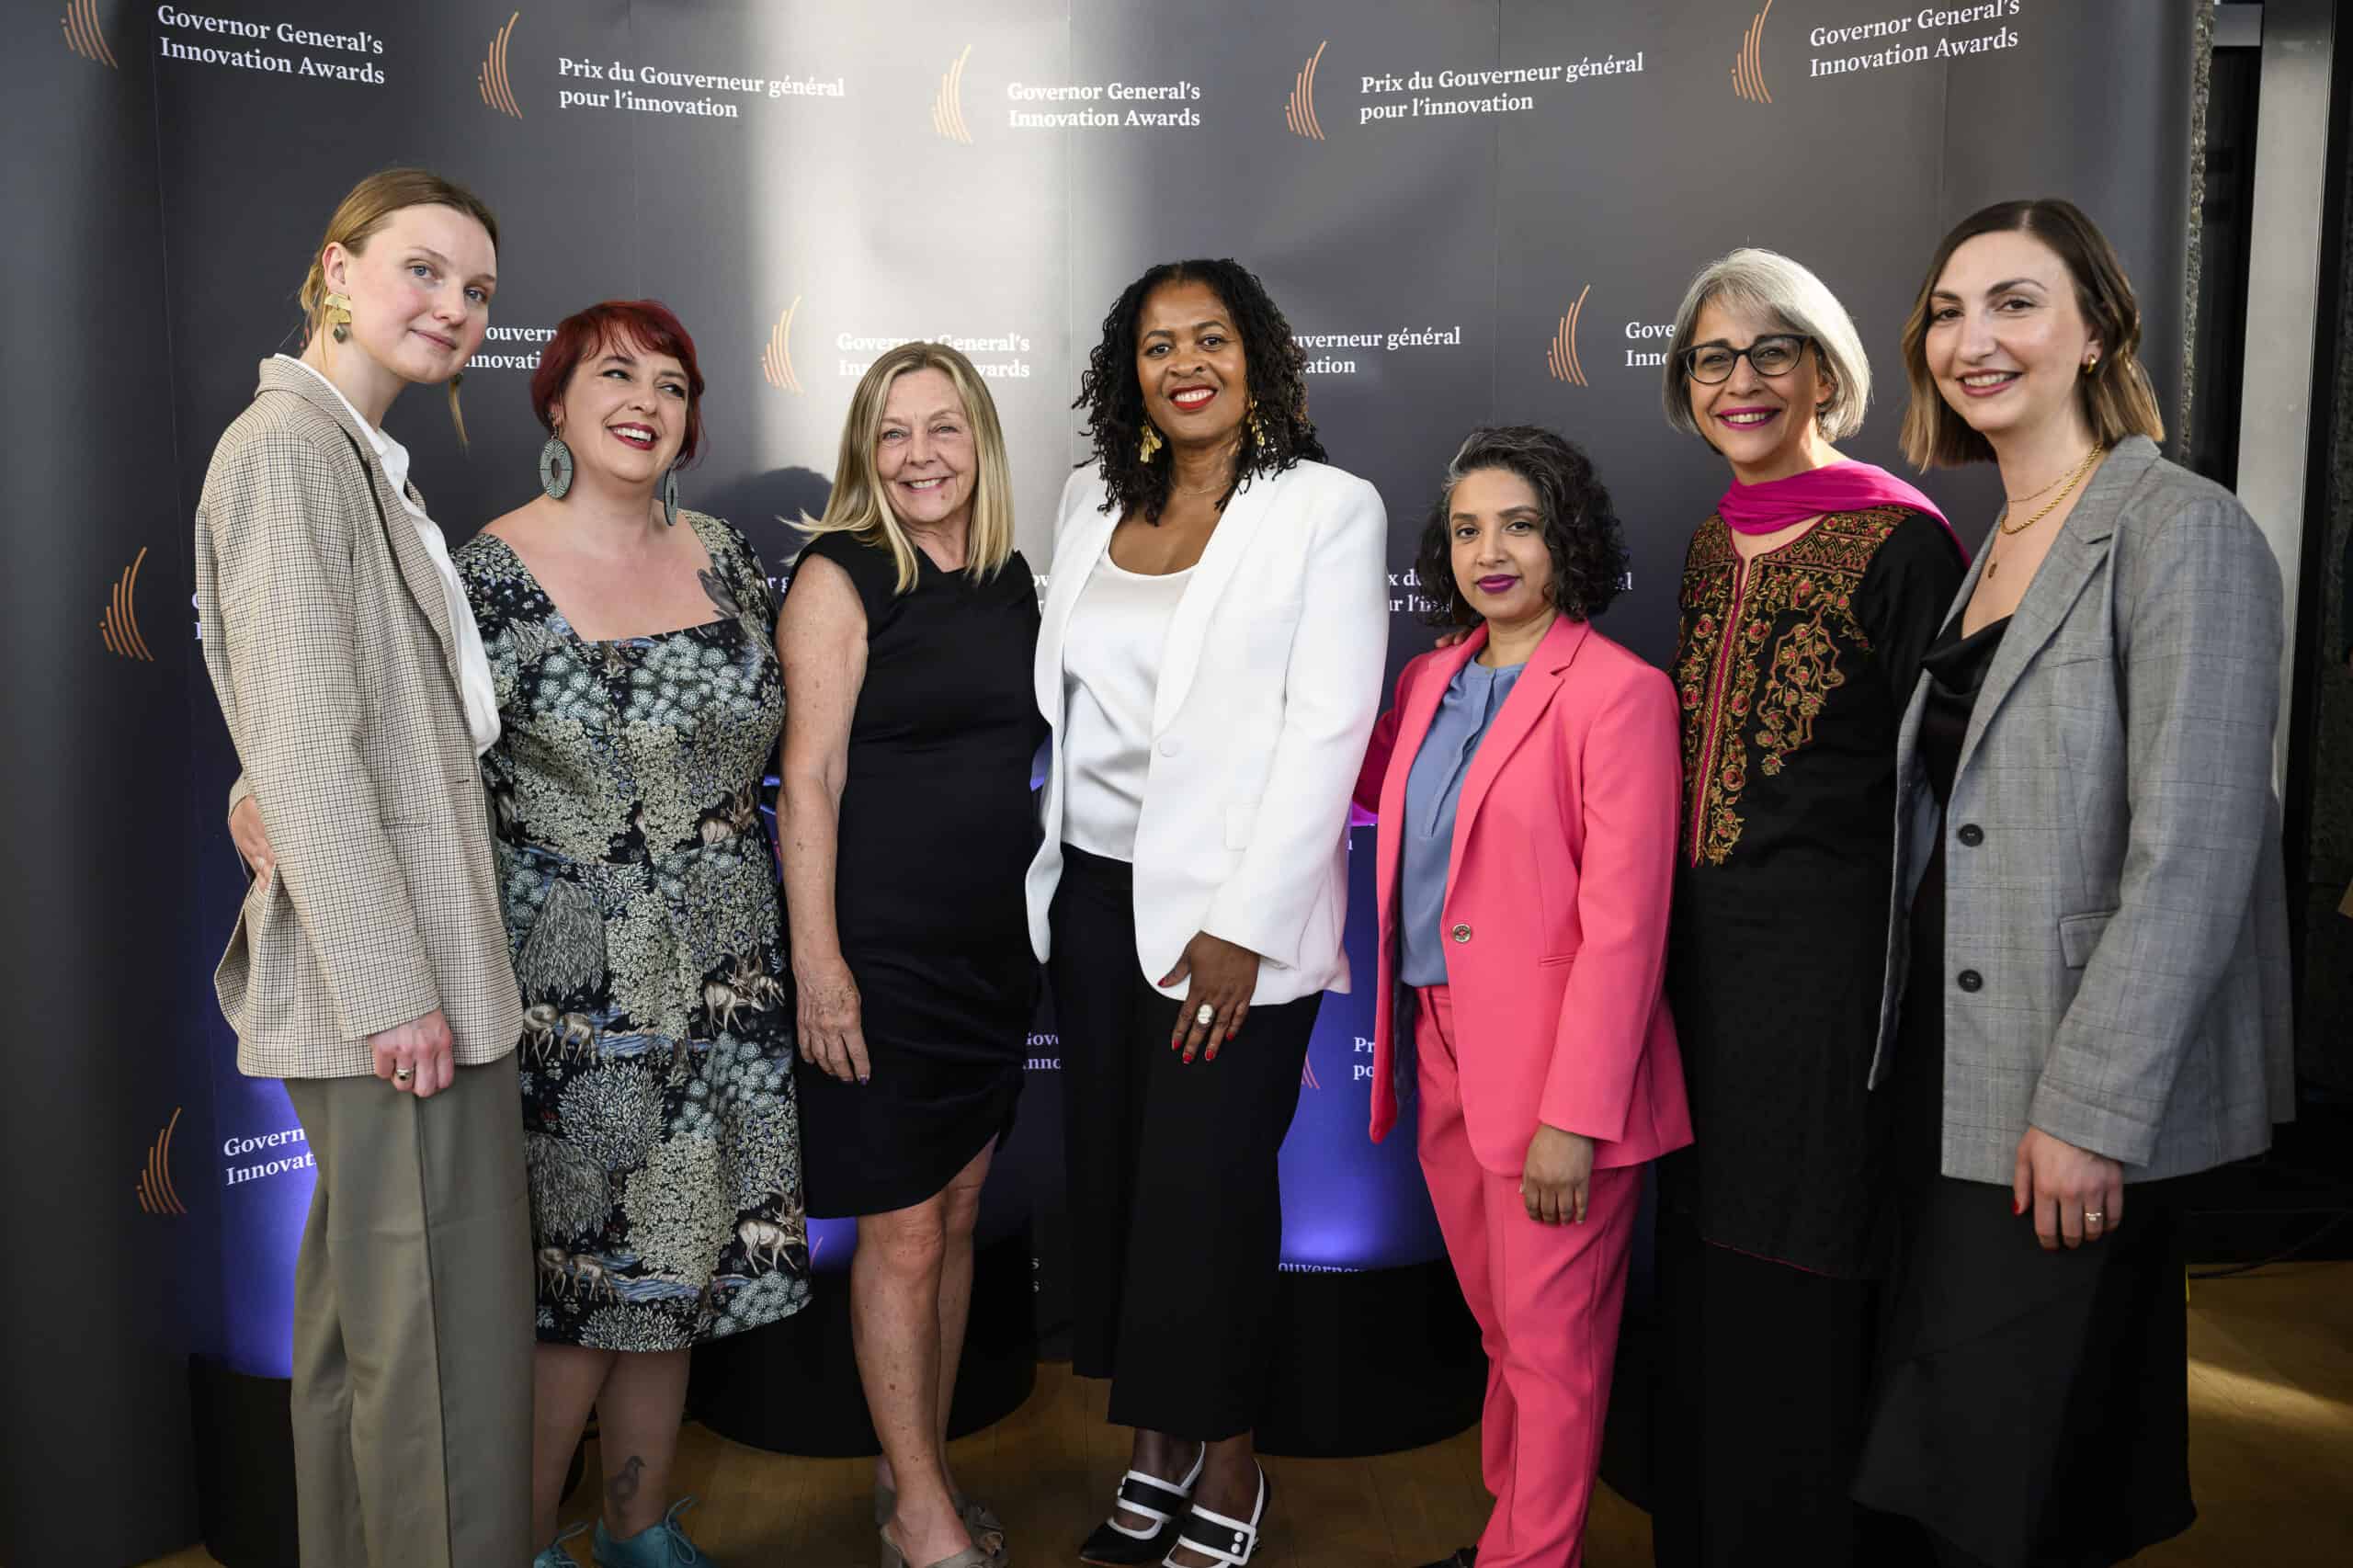 Canadian Women's Foundation staff at Governor General's Innovation Awards